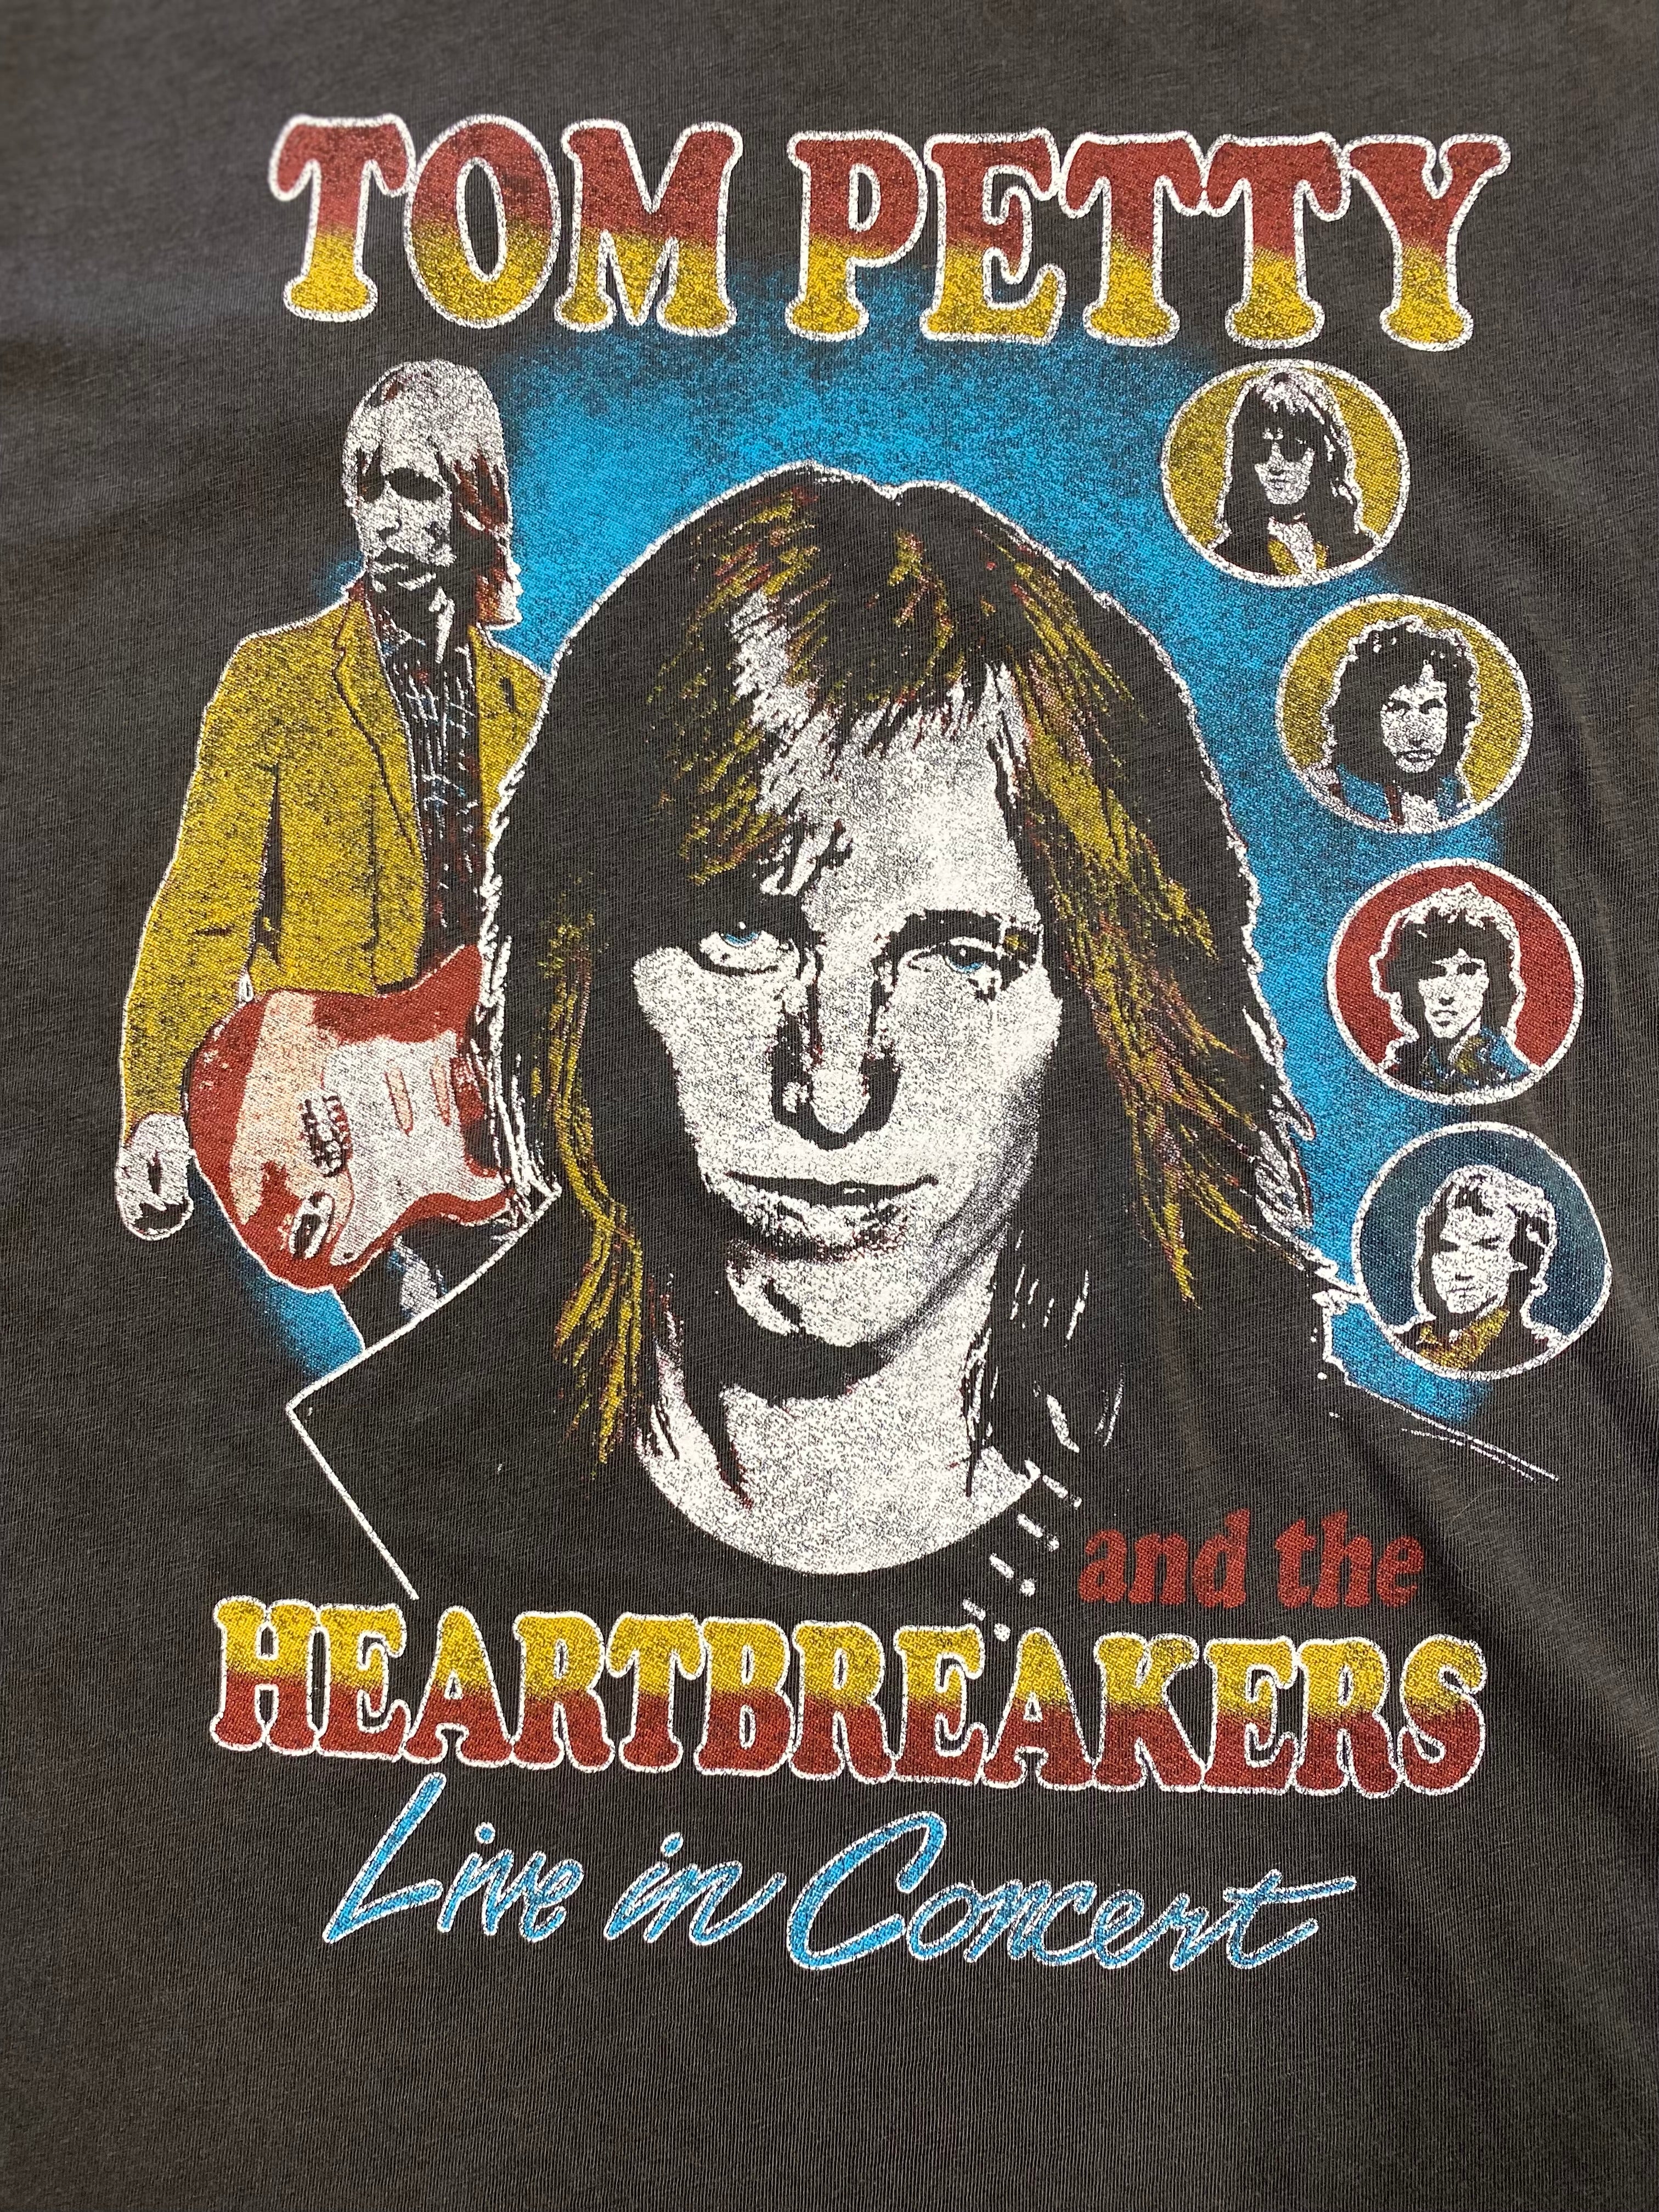 Tom Petty and the heartbreakers Live in Concert Muscle tee